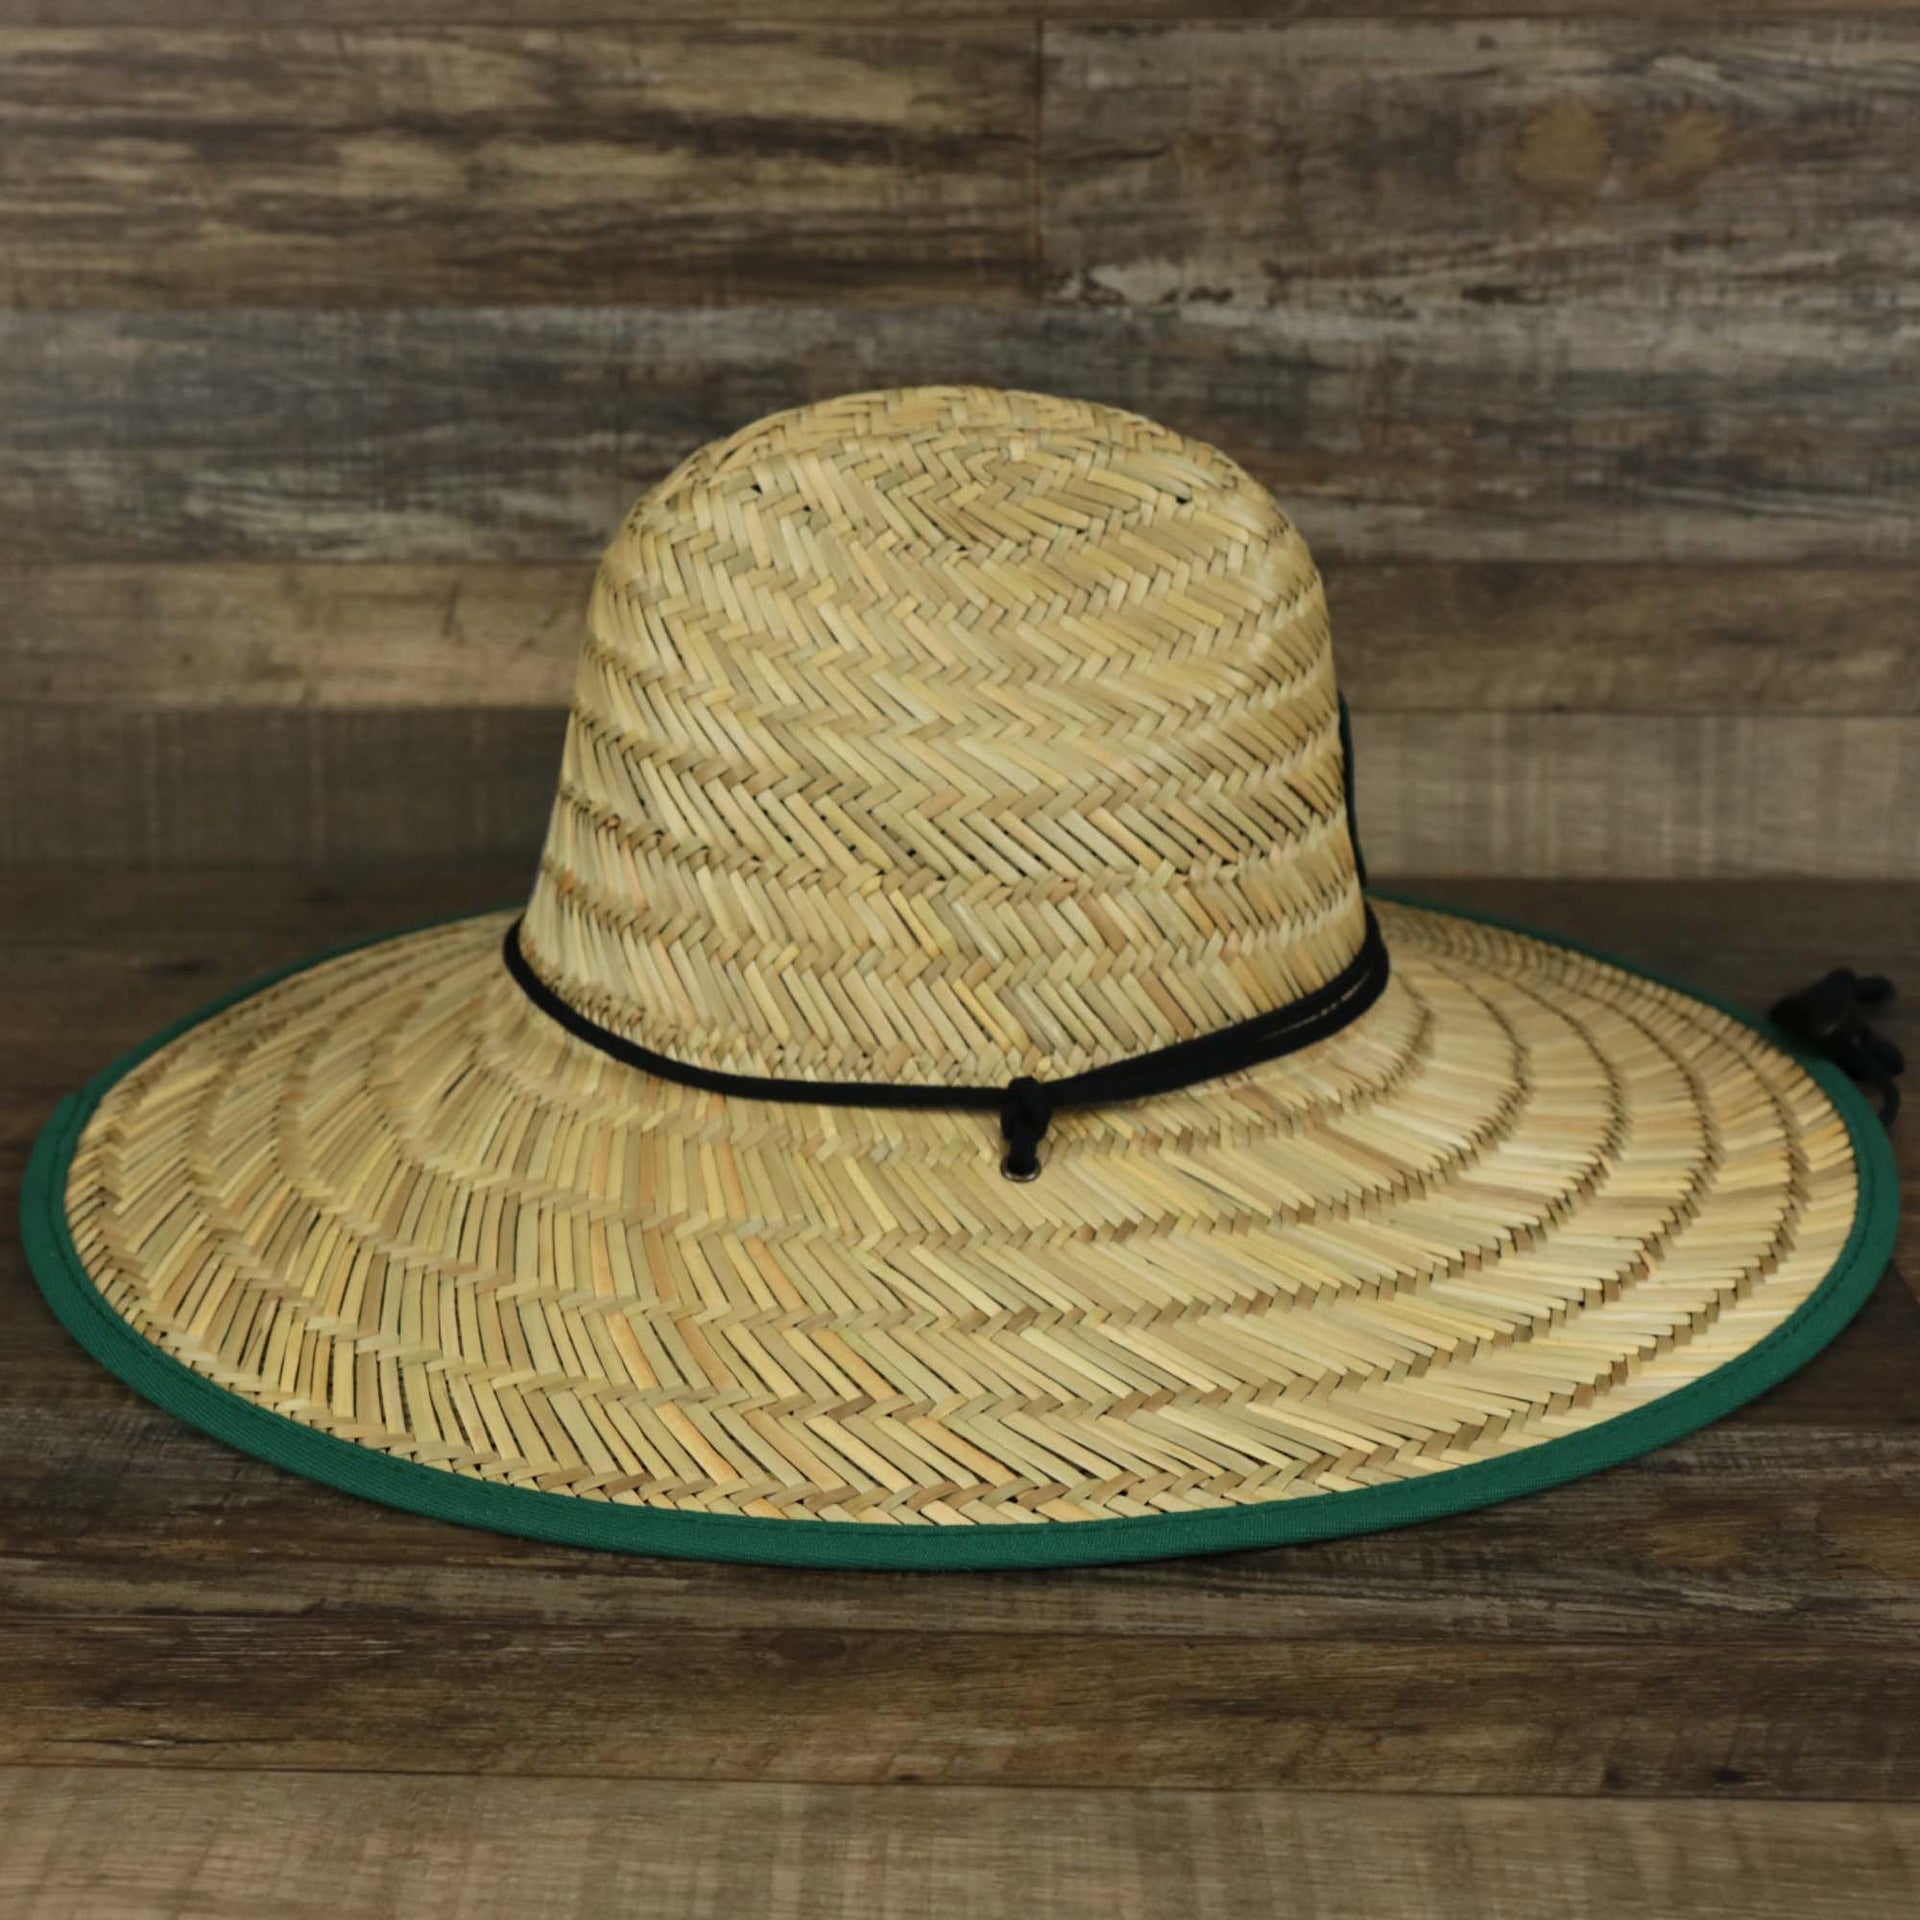 The wearer's right on the New York Jets On Field 2022 Summer Training Straw Hat | New Era OSFM